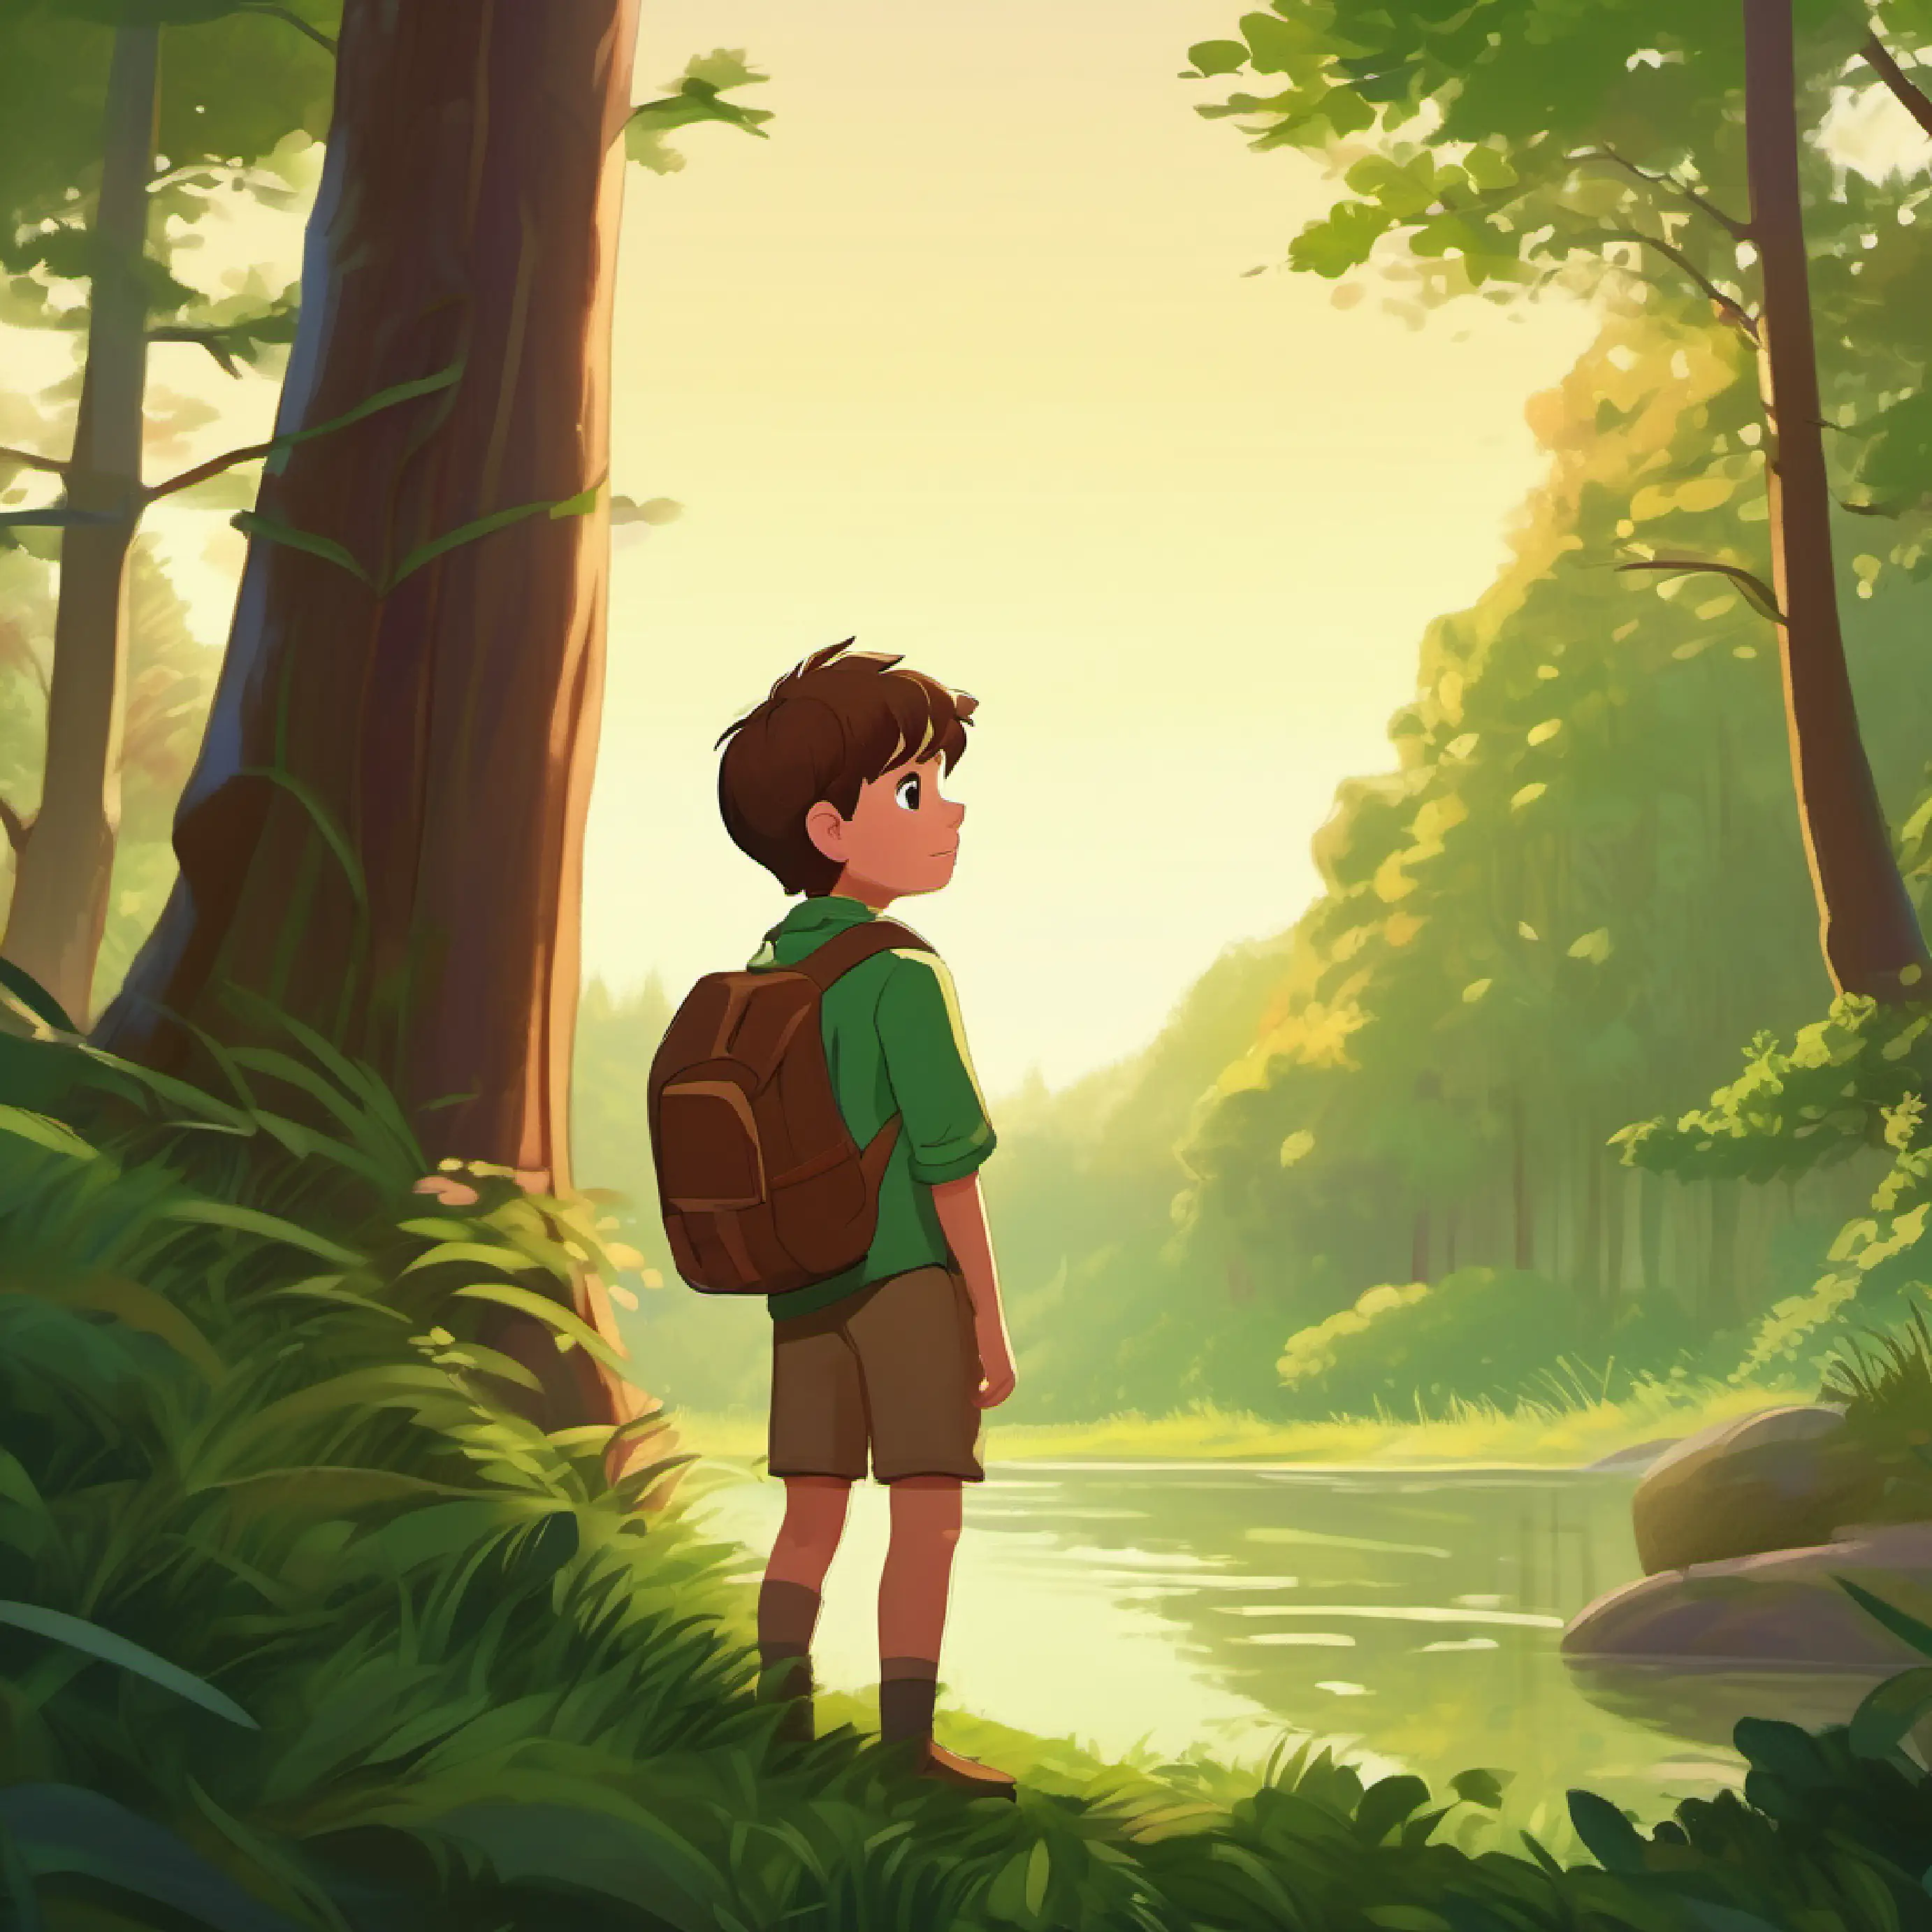 Introduction to Curious boy, short brown hair, green eyes, adventurous spirit and the setting at the forest's edge, morning time